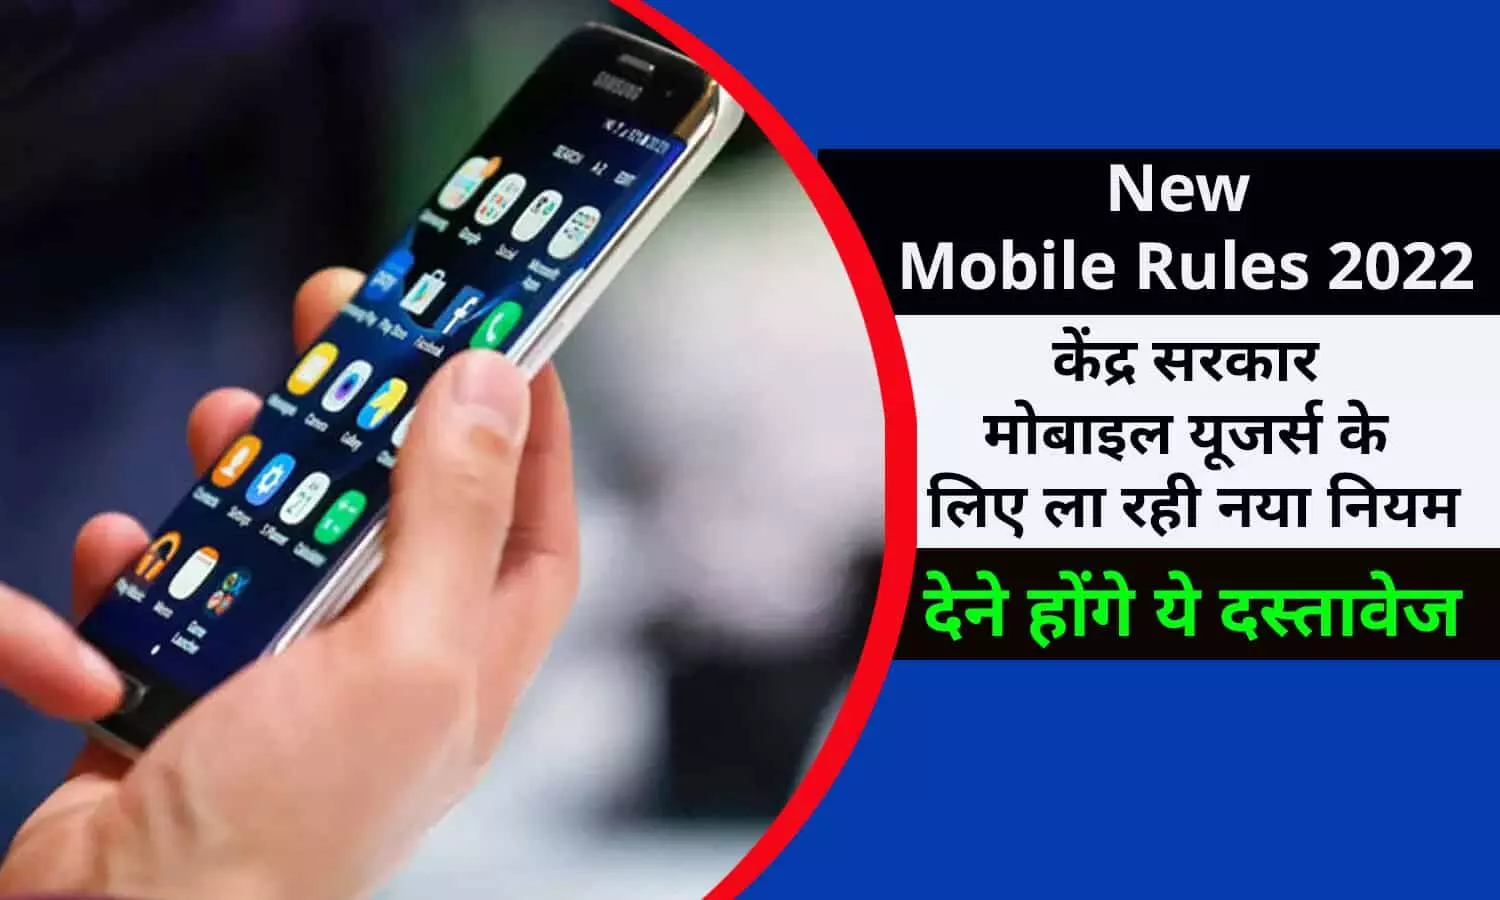 New Mobile Rules 2022